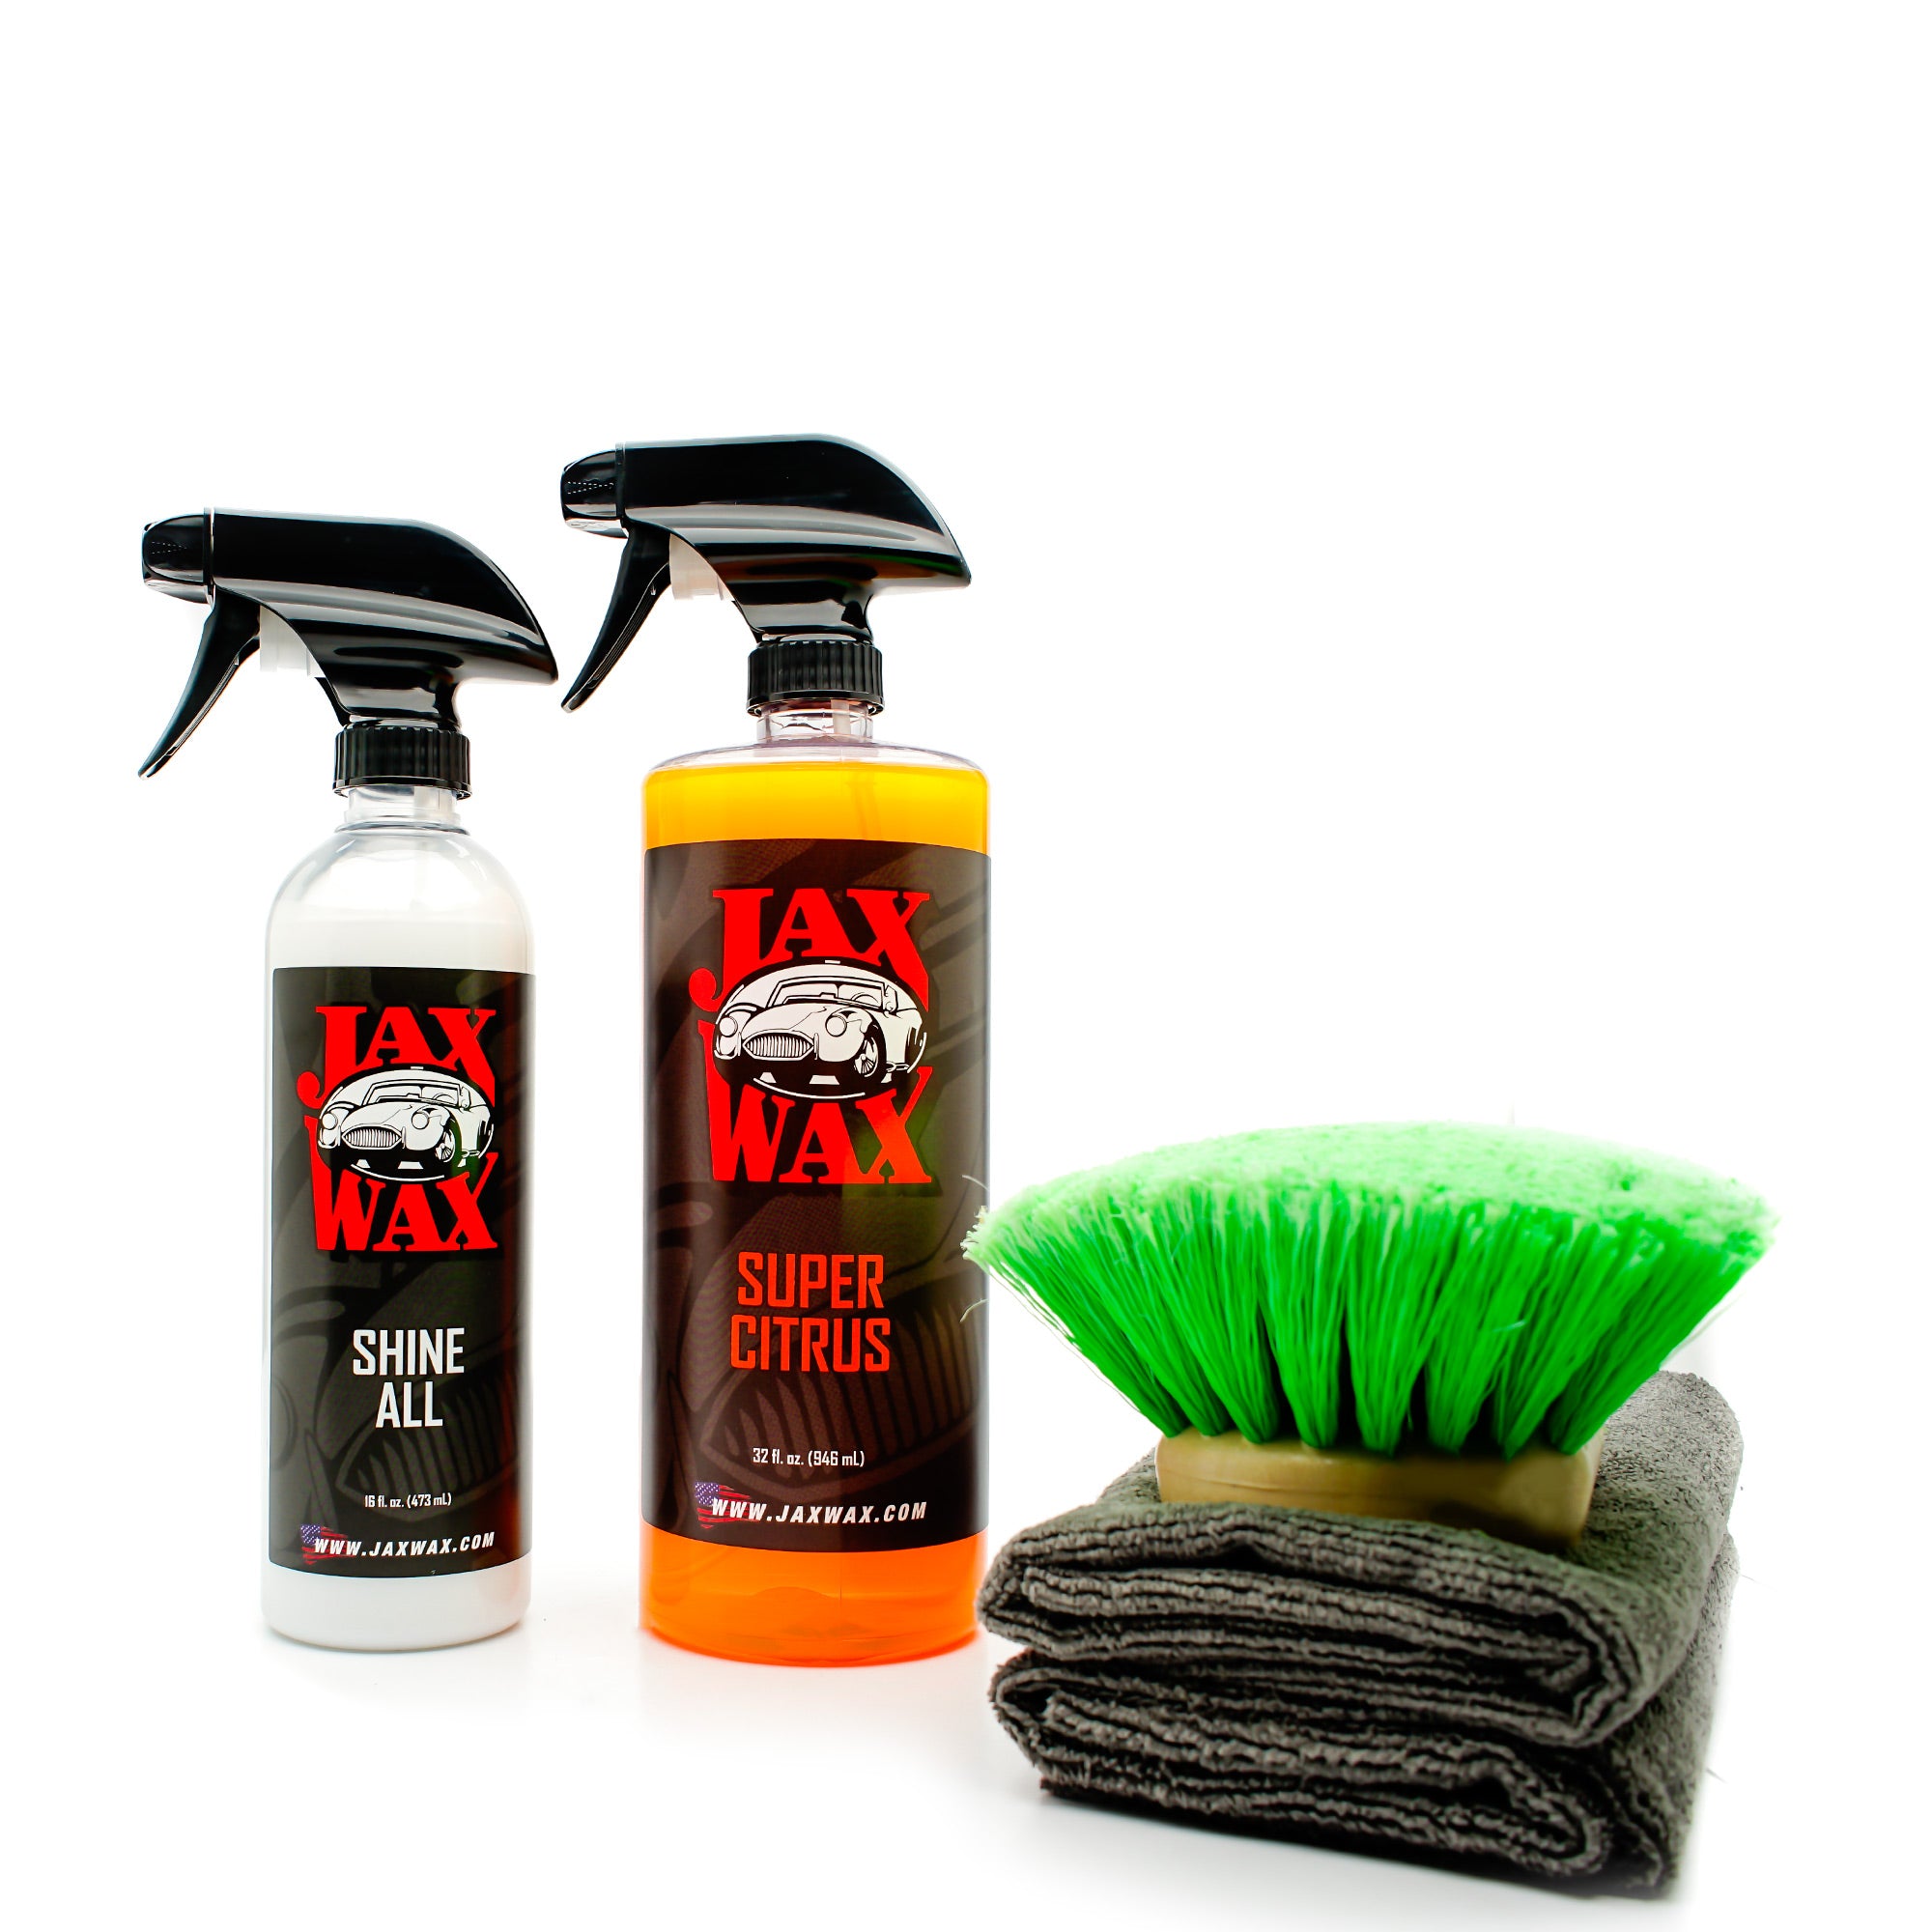 JAX WAX - Does It Really Work - I purchased several products